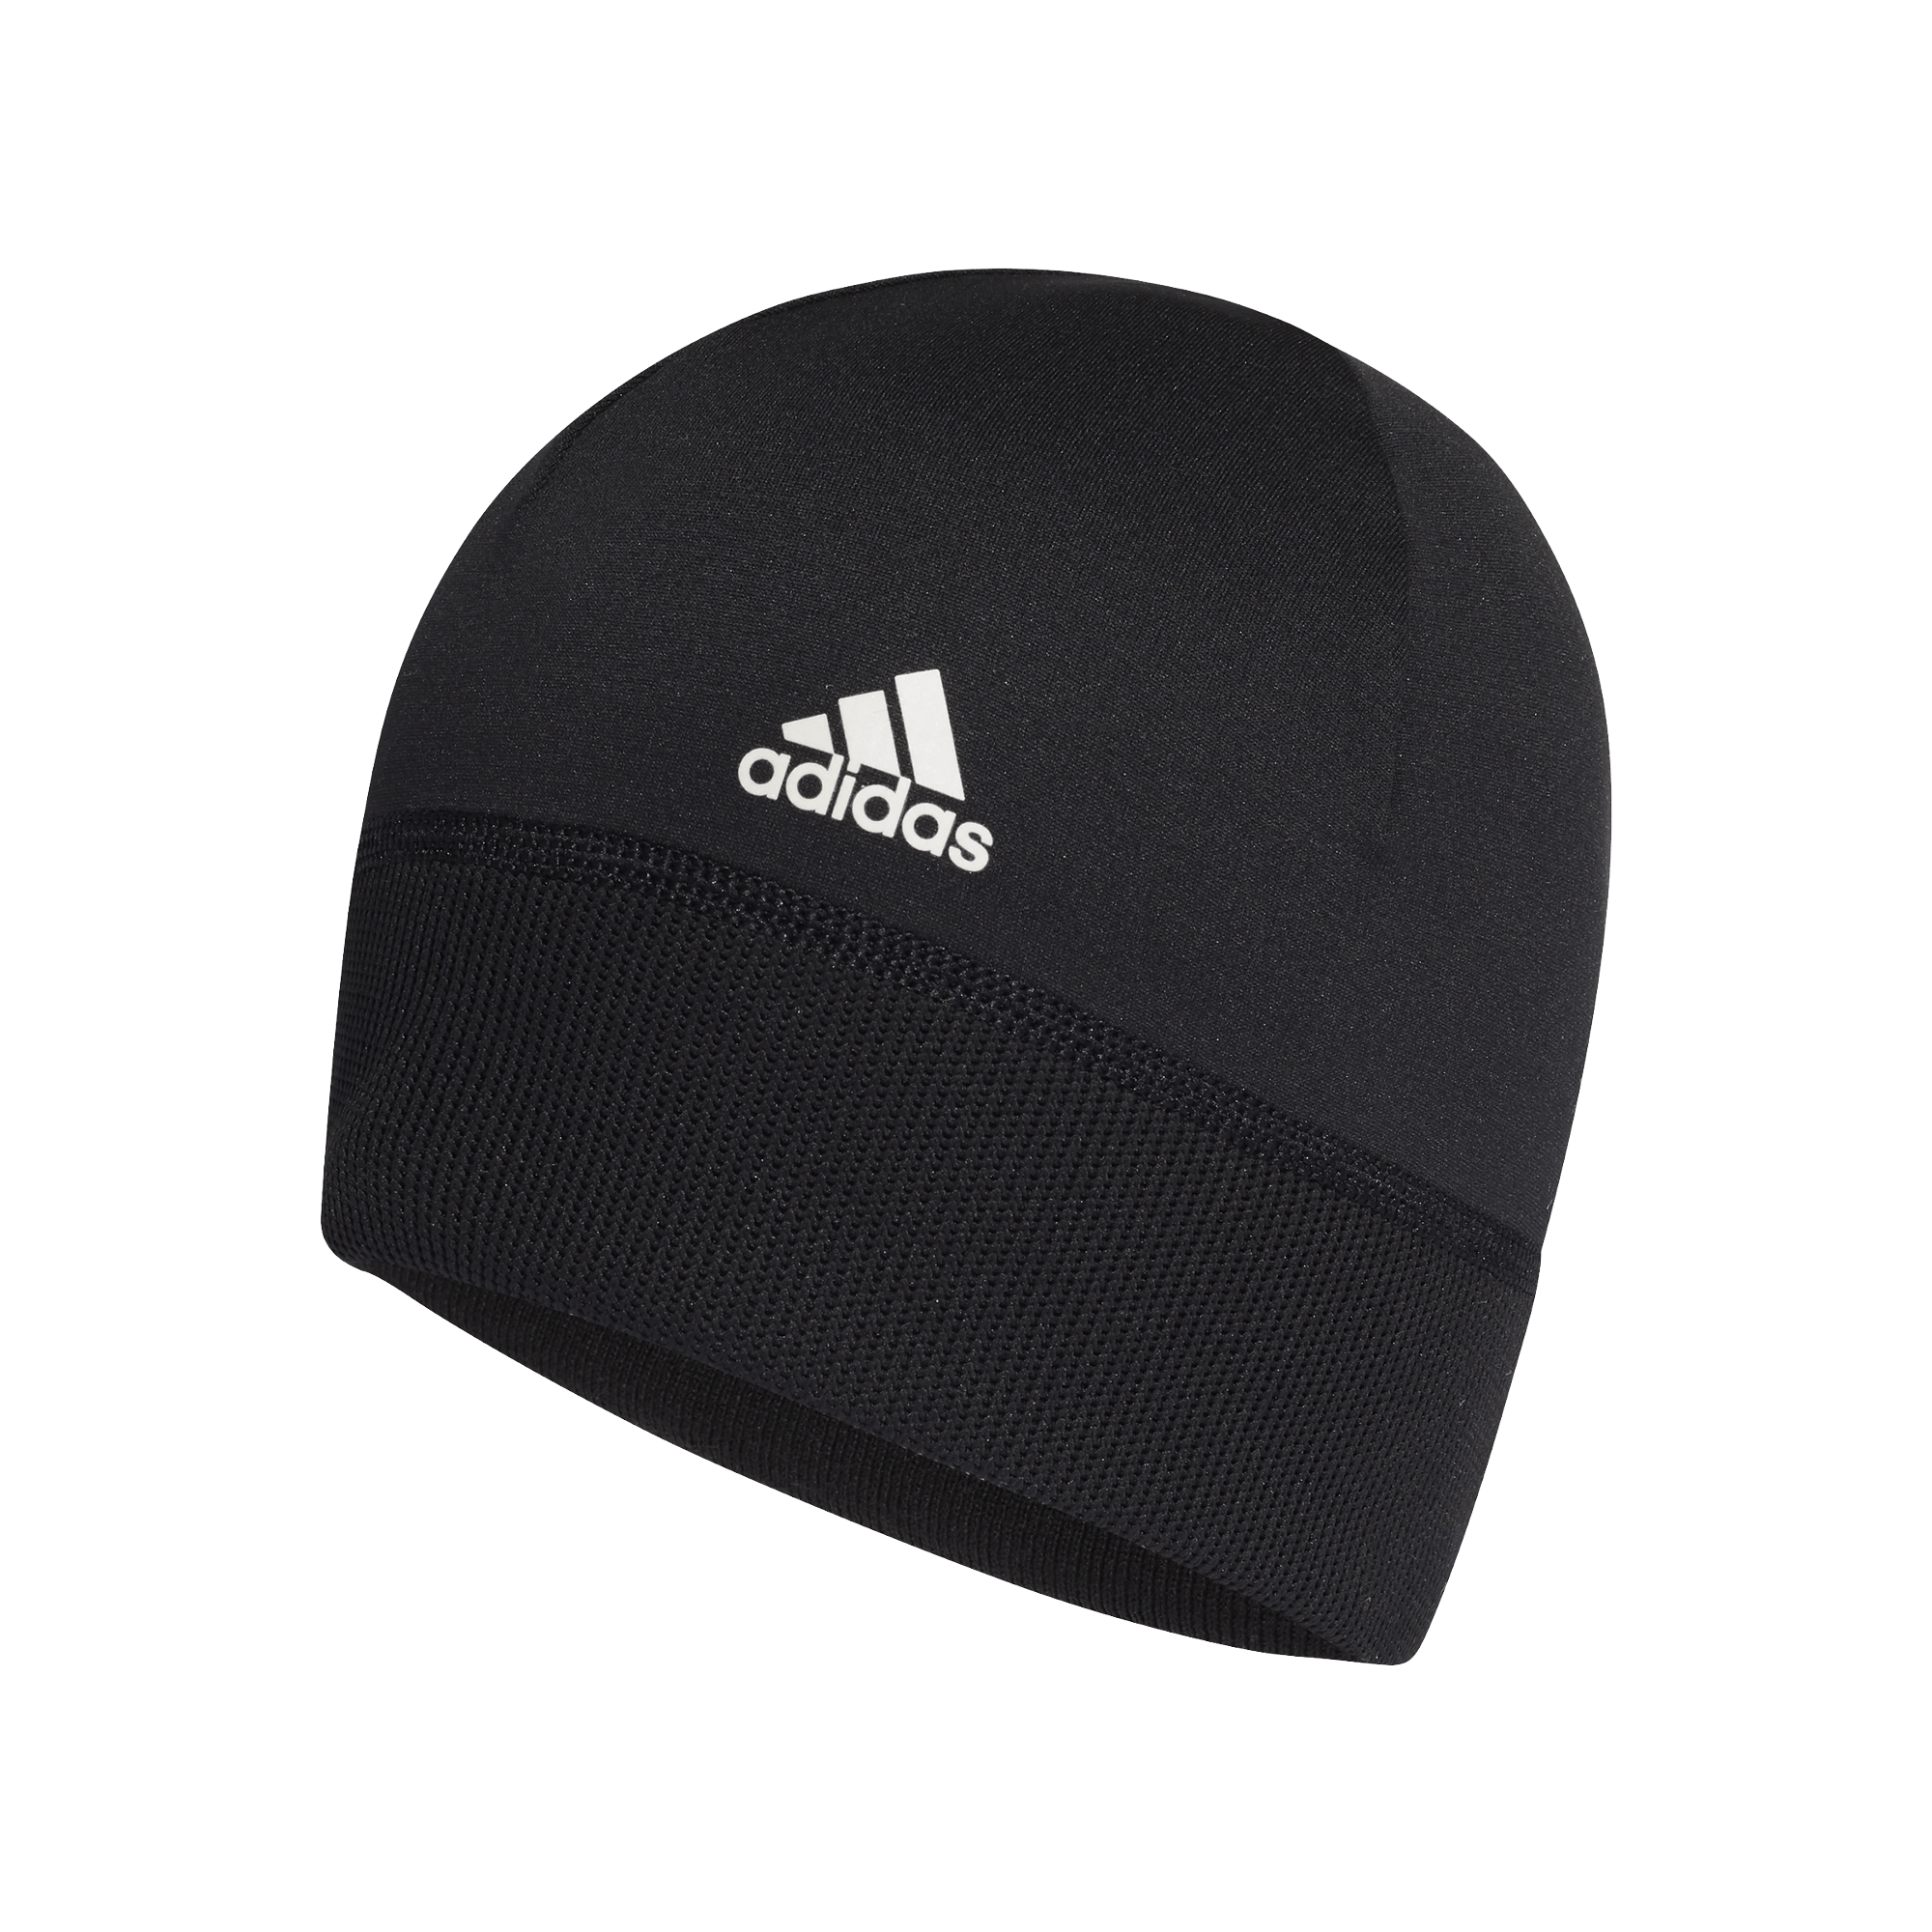 All Blacks Rugby Beanie New Zealand Rugby 2021 Moisture Wicking Polyester Adidas - World Rugby